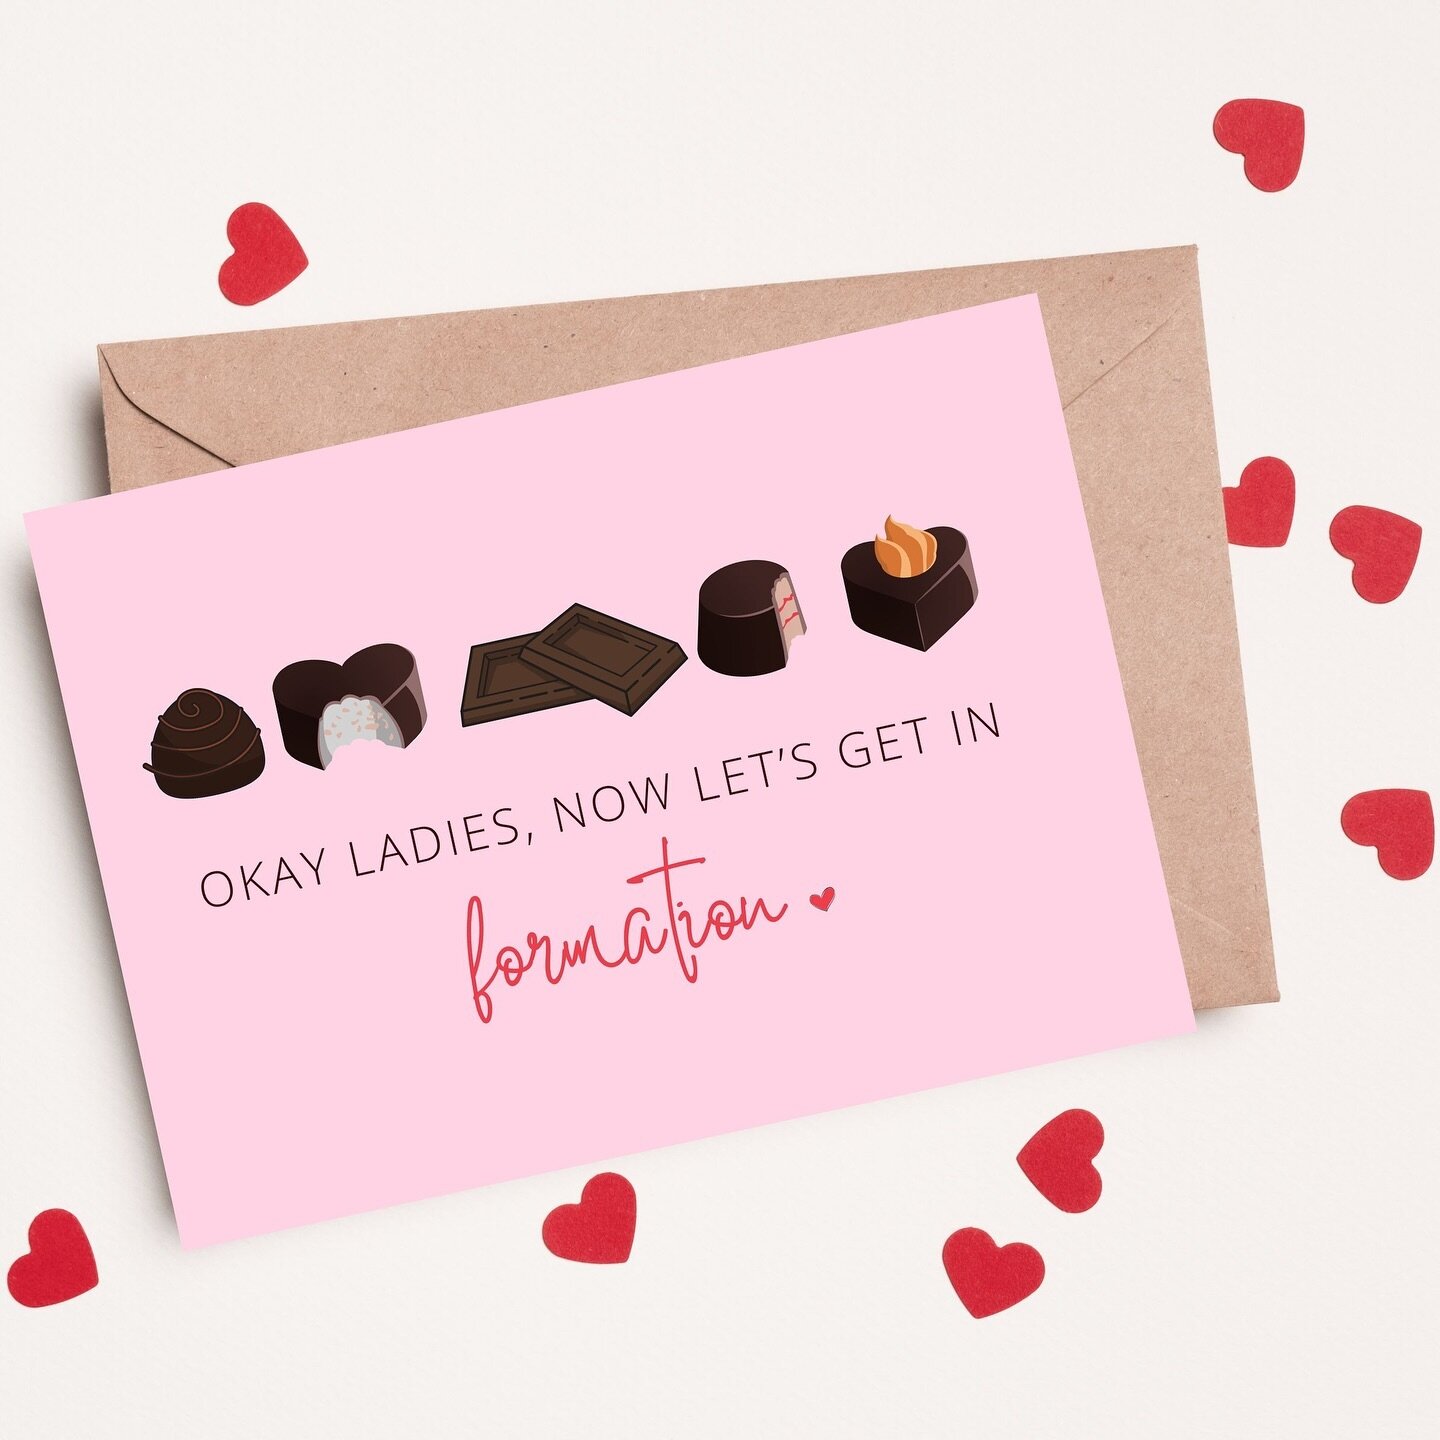 OKAY NOW LET&rsquo;S GET READY FOR VALENTINES DAY👏🏼🥰💘 #tbt to these cute little invitations I made for a galentines day themed party! 

#invitations #galentinesday #valentinesday #galentinesdayparty #invitationdesign #pink #graphicdesign #events 